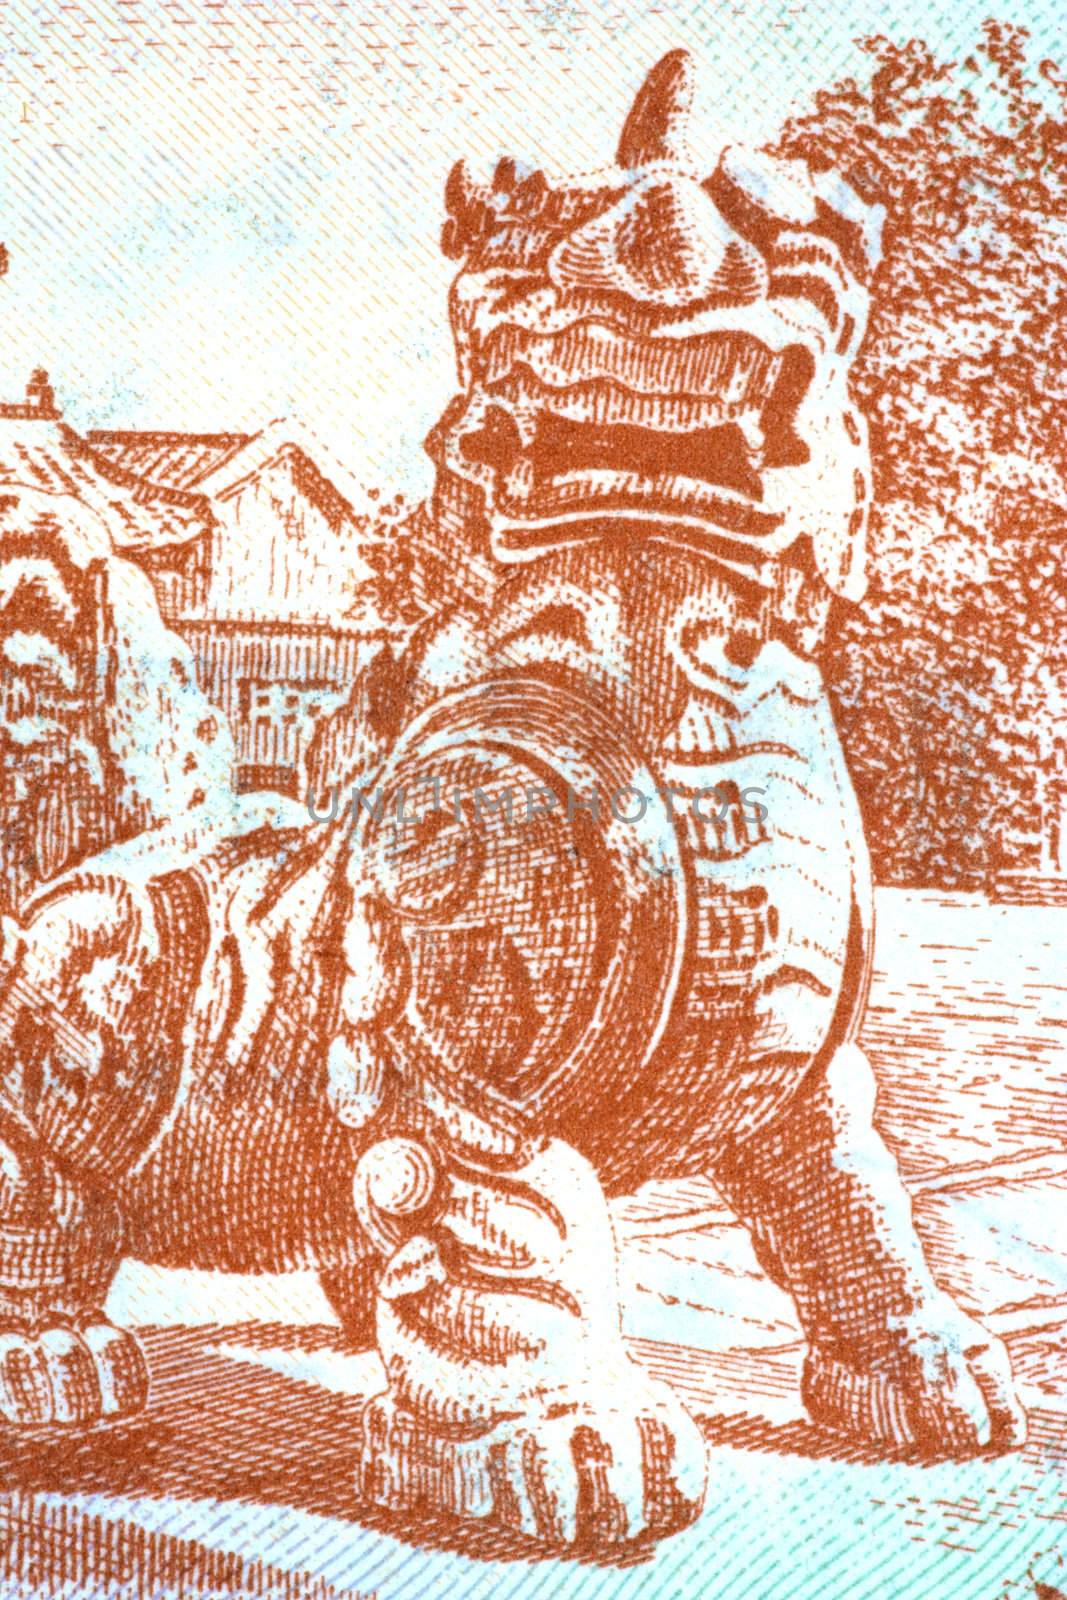 Macro image of a stone guardian of a mythical animal on a currency note.